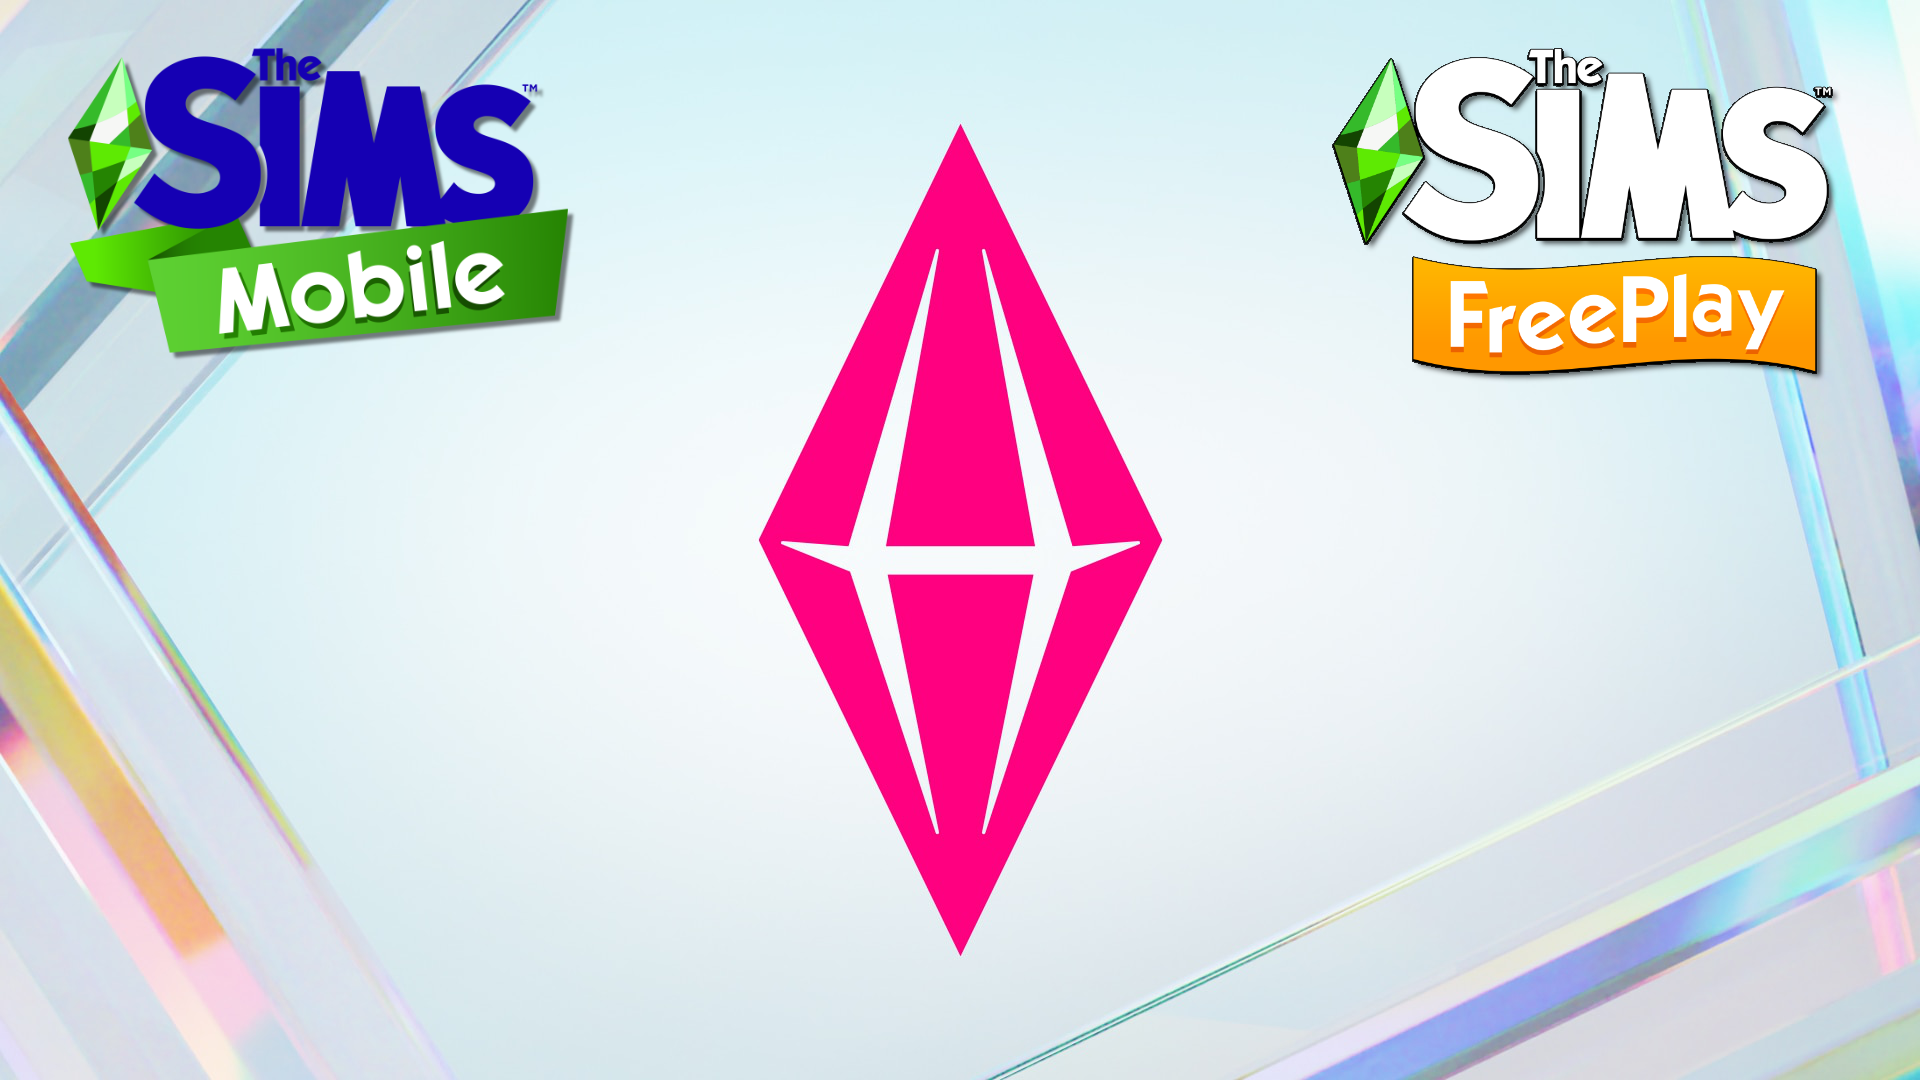 Behind The Sims' Summit – The Sims FreePlay Round Up